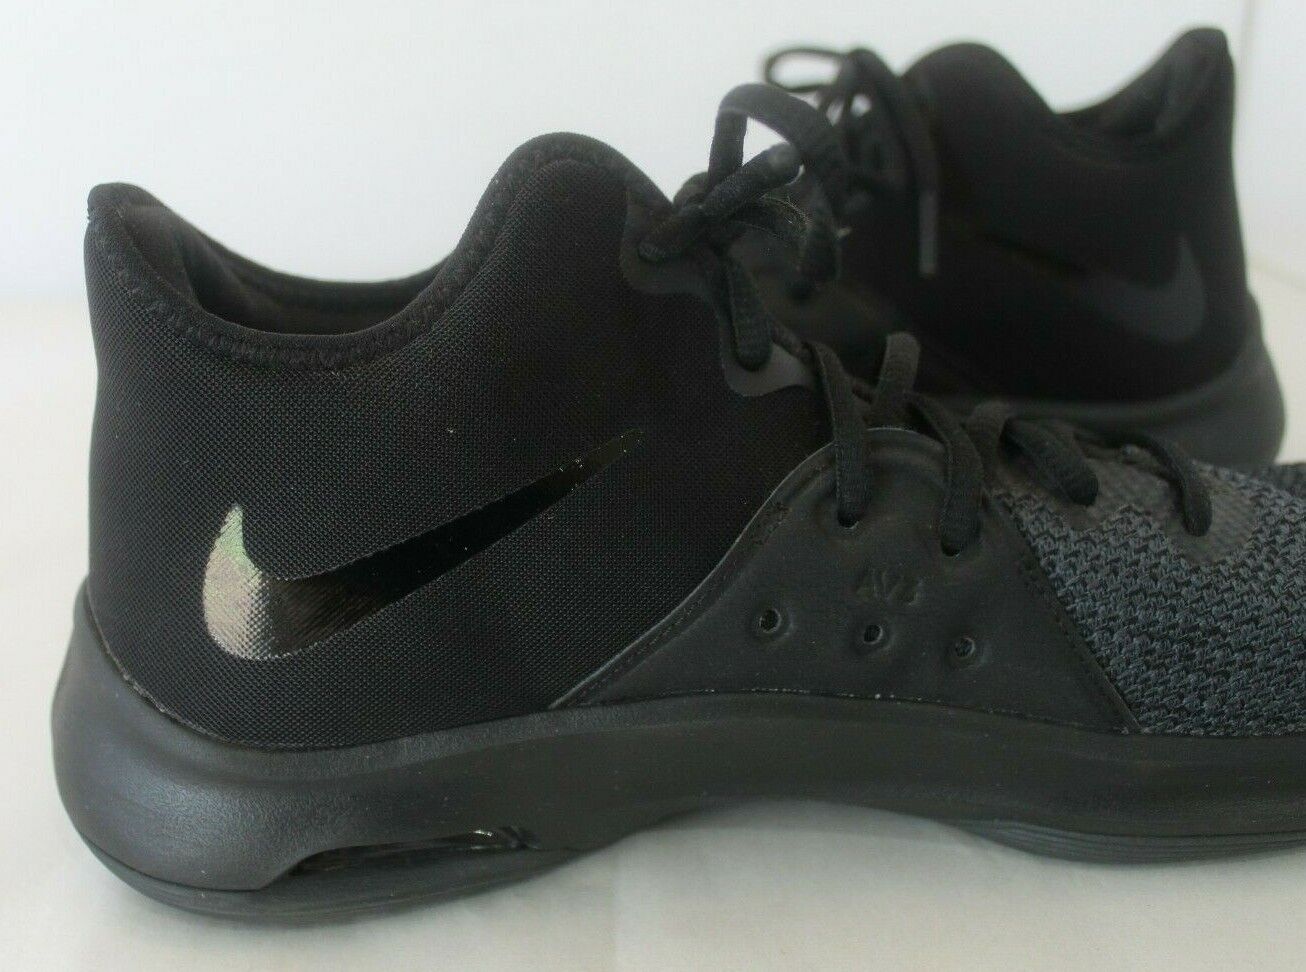 Nike Air Versitile III Basketball Trainers - A04430-002 -Black - Size 9.5 US